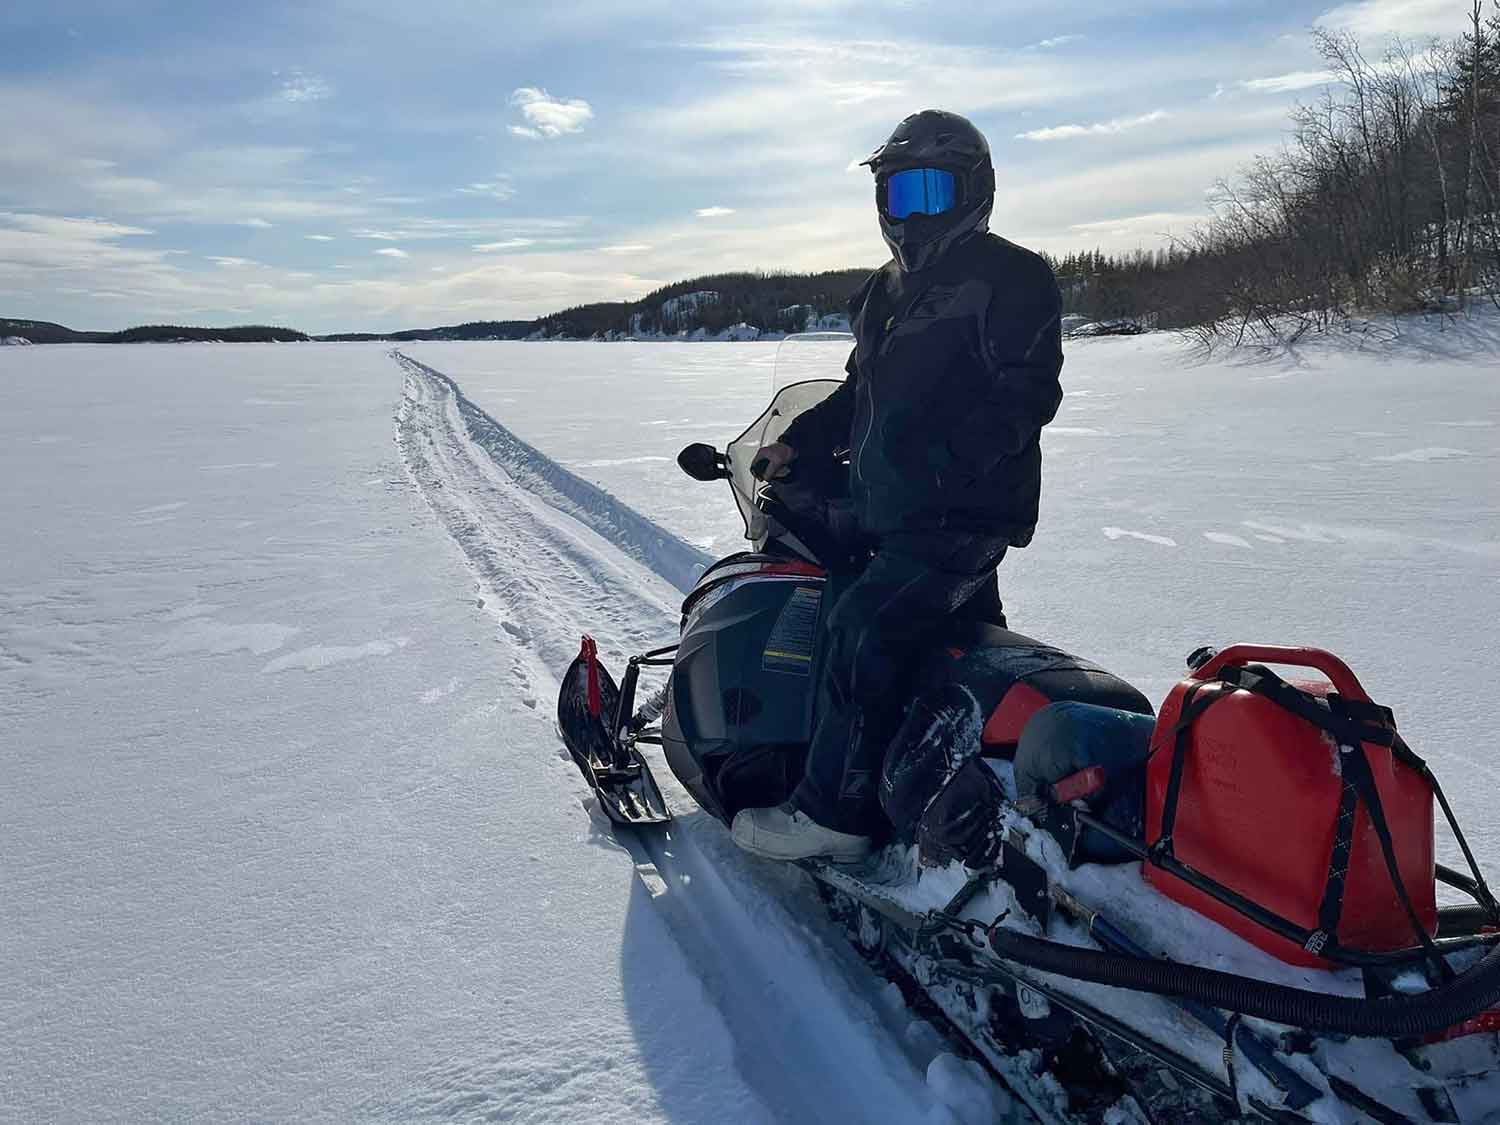 A man on a snowmobile turns around to face the camera with a snowy trail carved out ahead of him.